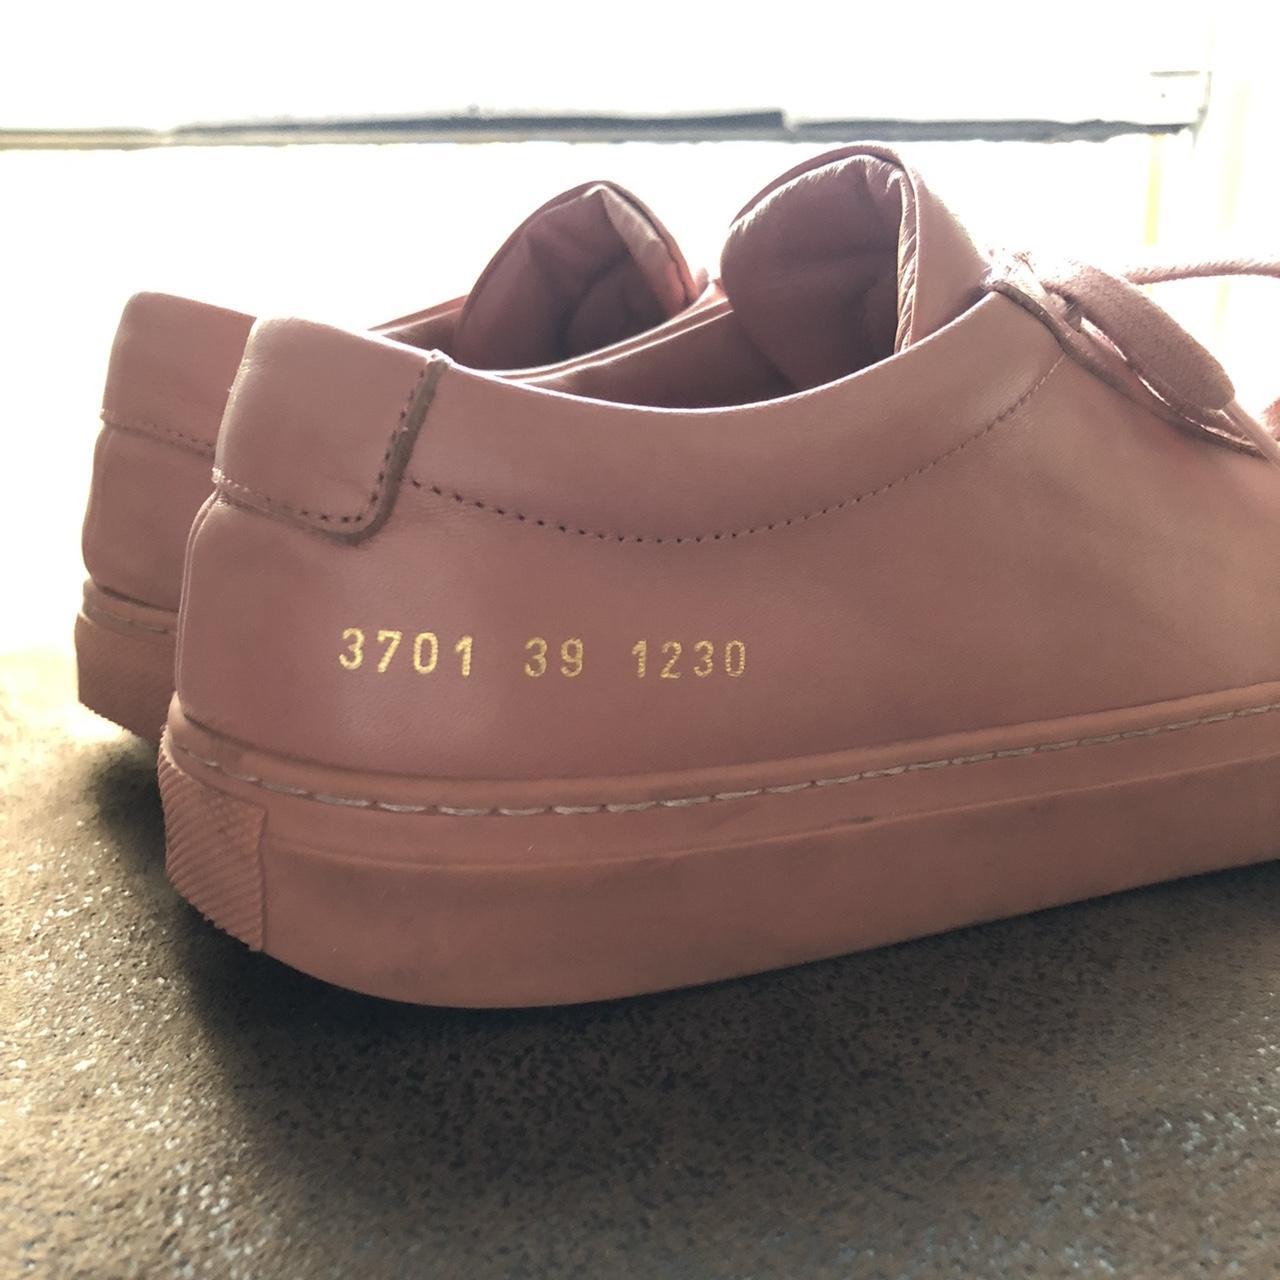 Product Image 4 - Common Projects 

Has been worn